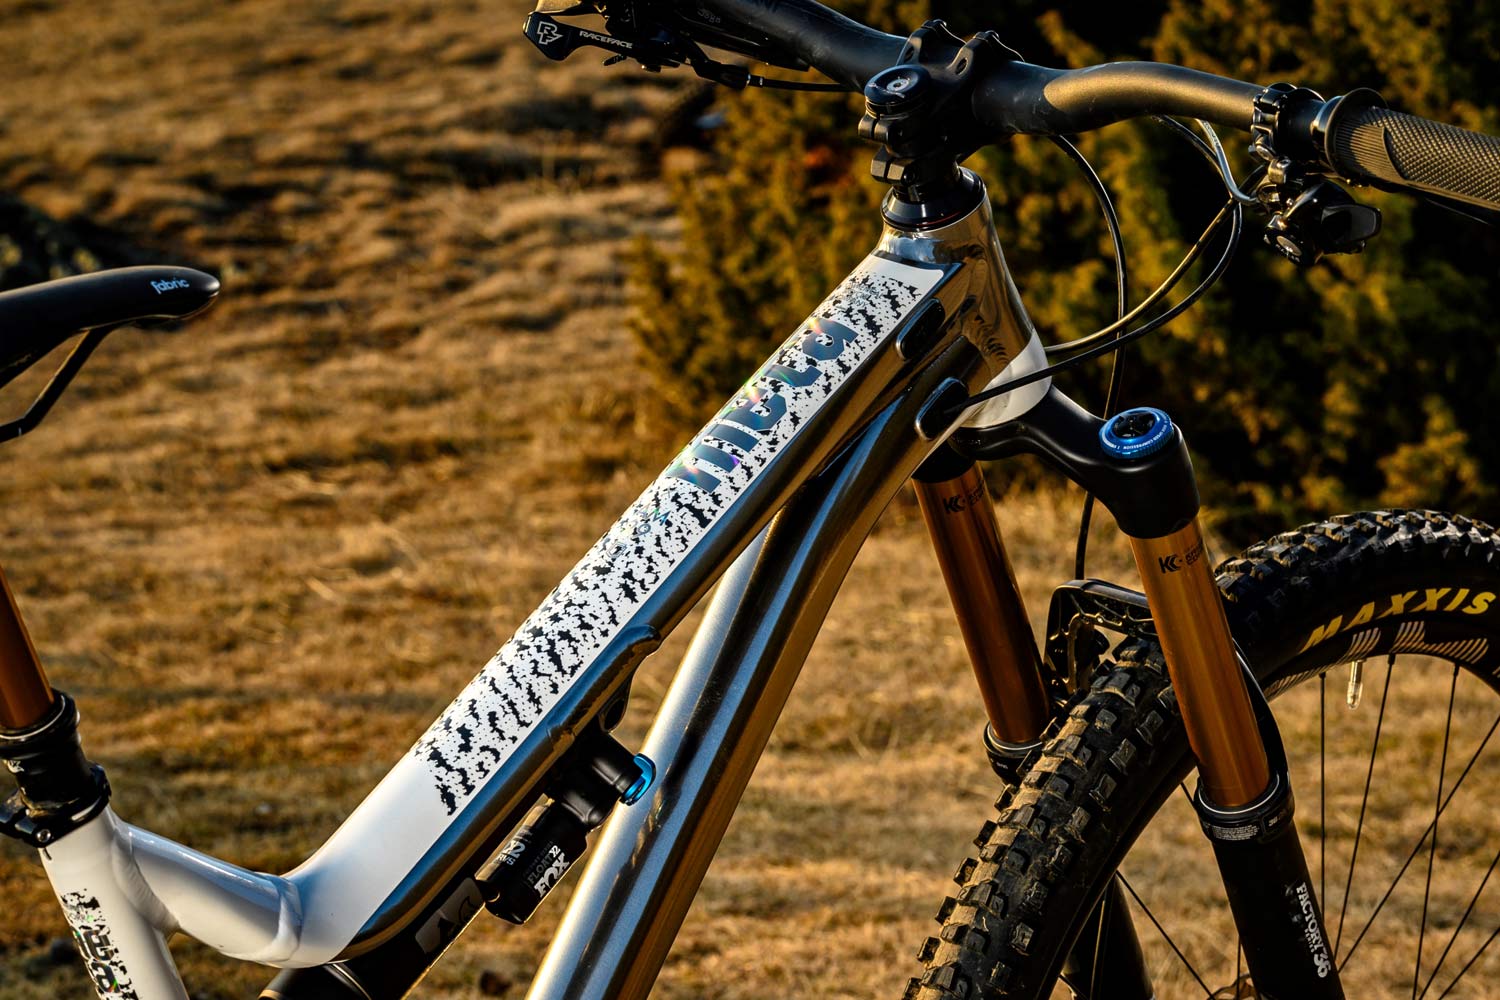 2020 Commencal Meta AM 29 Worlds Edition enduro bike, special edition affordable 160mm 29 alloy enduro trail all mountain bike